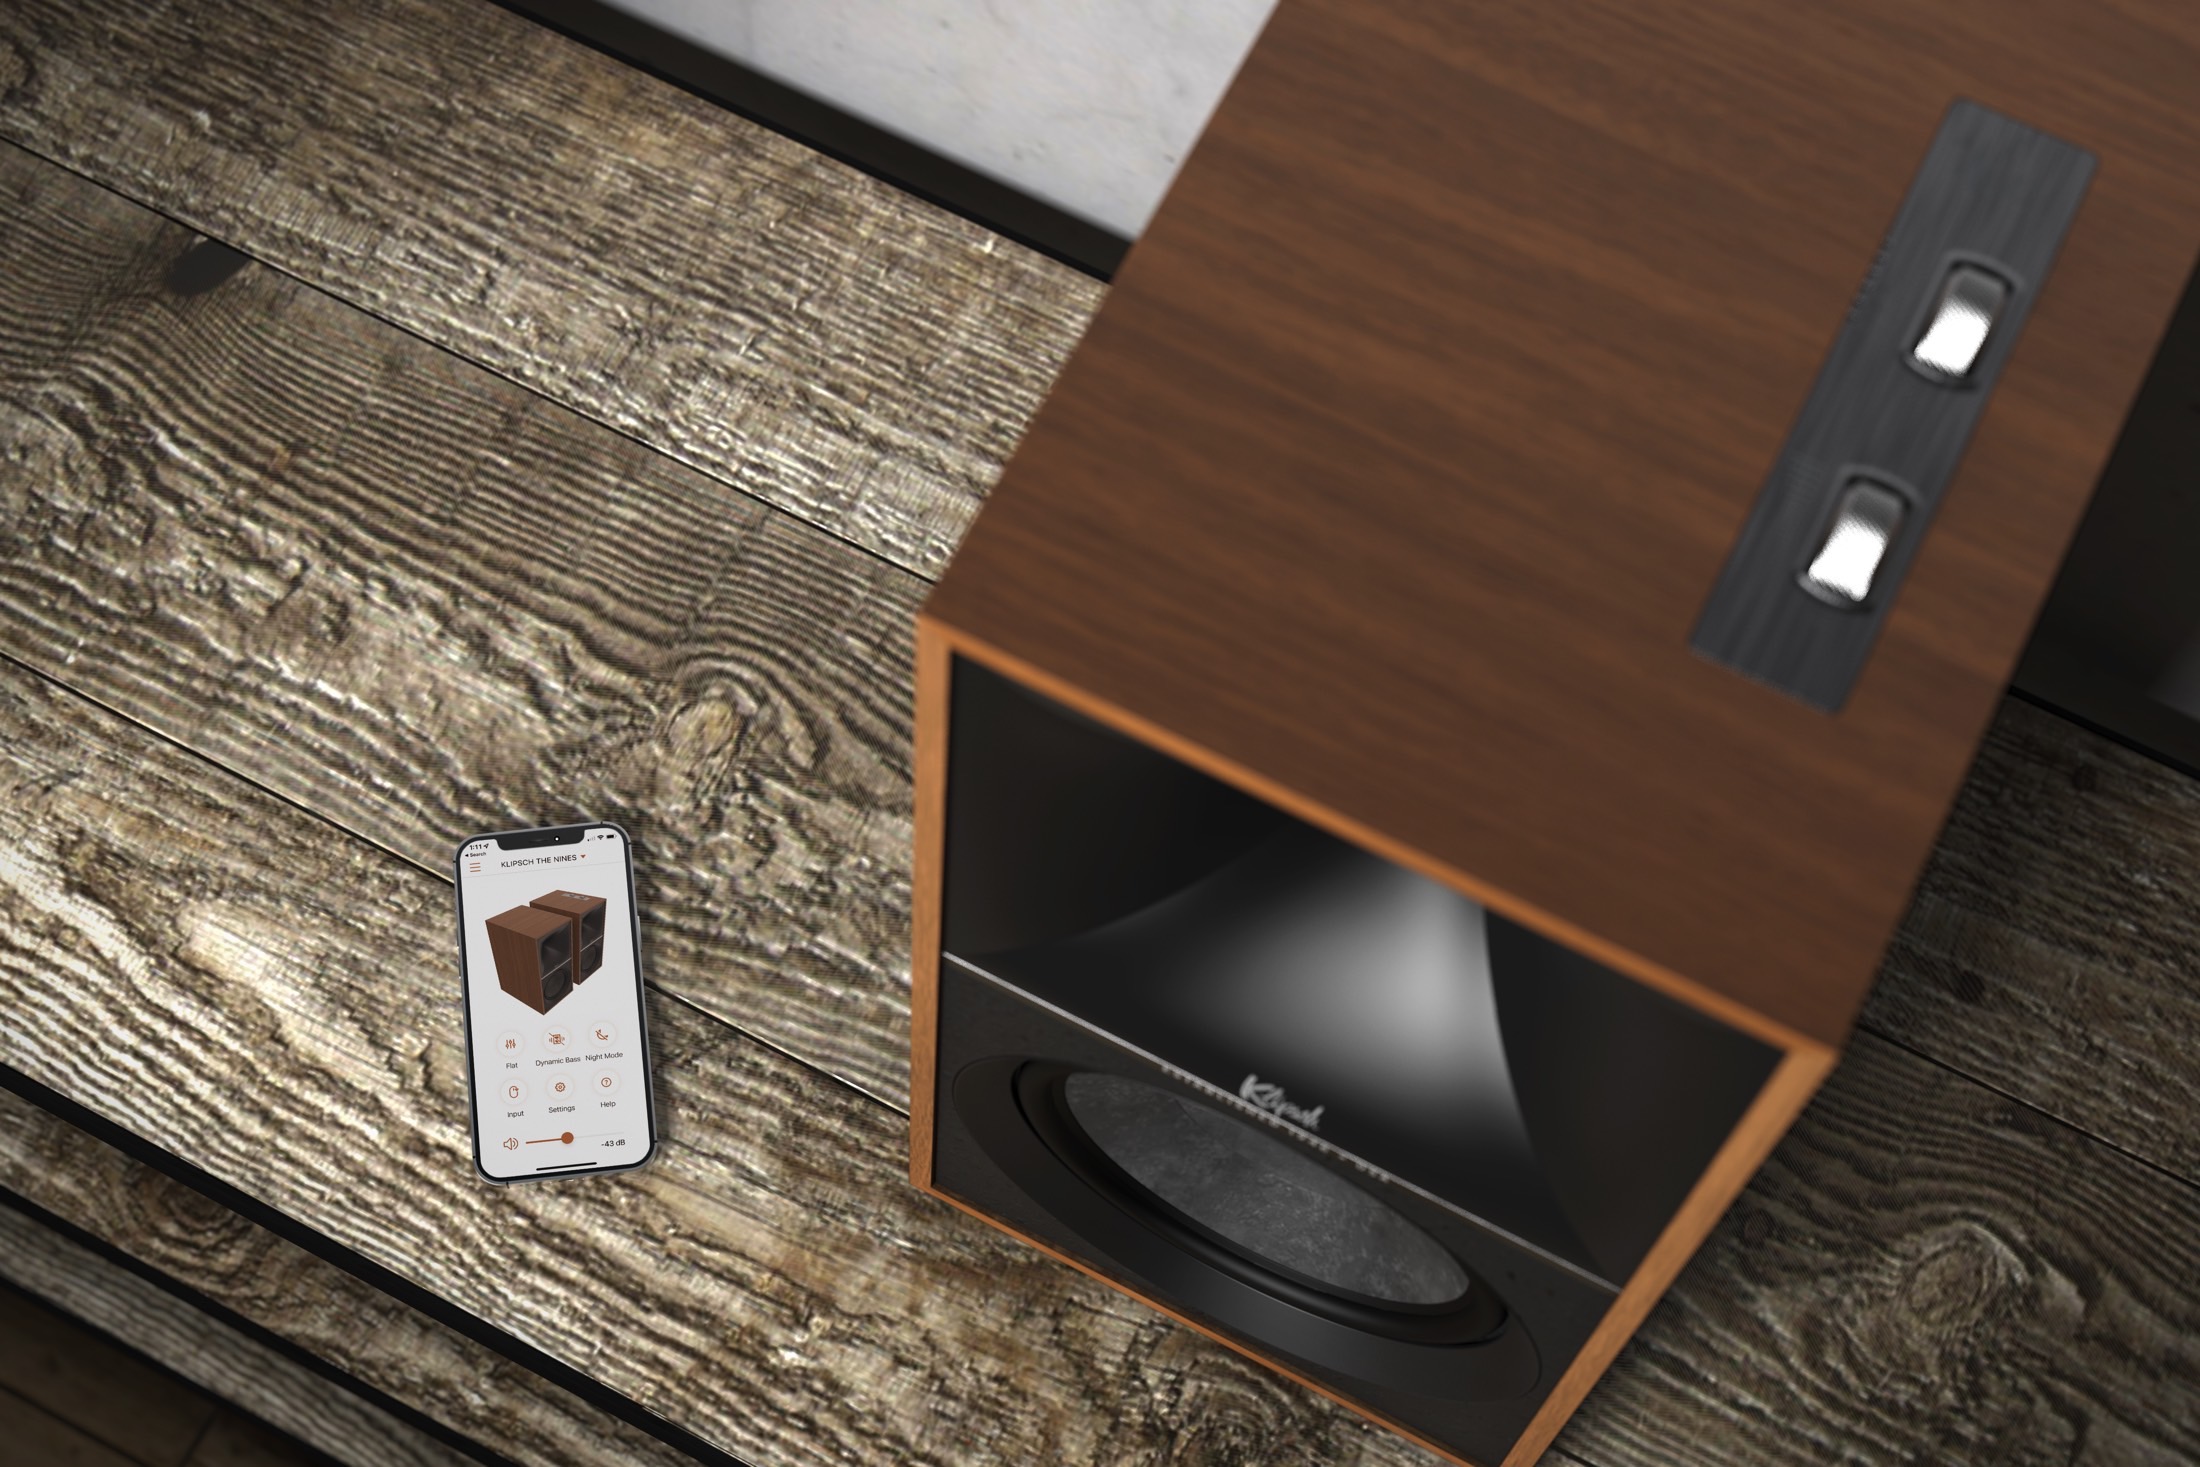 Klipsch The Nines in walnut finish seen next to a smartphone.